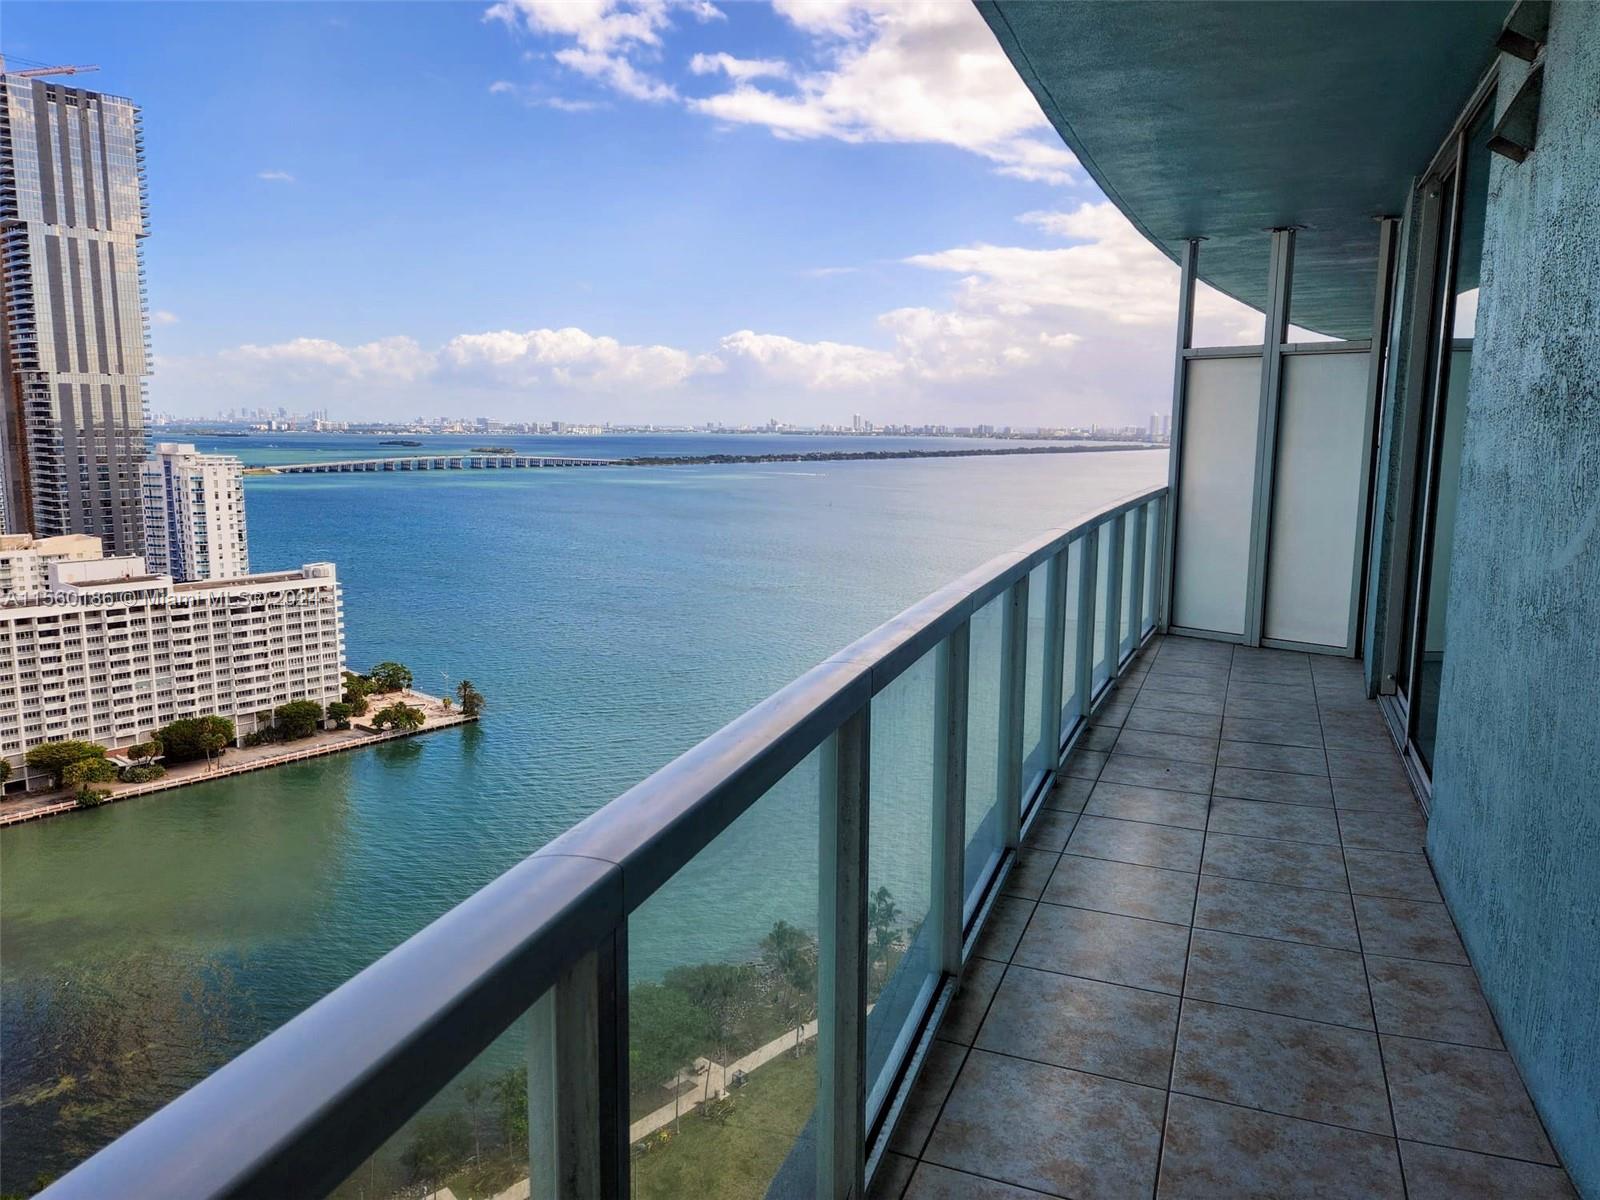 Embrace breathtaking sunrises and panoramic Bay views from this stunning convertible 2-bed, 1-bath unit, boasting a versatile den perfect for a 2nd bedroom or home office. Nestled in the prestigious Quantum on the Bay, enjoy modern upgrades including a fully renovated bathroom, sleek porcelain tile floors, and a stylish open kitchen. Located in the heart of Edgewater Miami, steps from Pace Park & Biscayne Bay, indulge in resort-style living with top-notch amenities such as a state-of-the-art fitness center, complimentary yoga classes, 2 swimming pools, and more. With a prime location minutes from South Beach, Brickell, and Wynwood, this property offers both convenience and luxury, making it an ideal choice for homeowners & investors alike. Don't miss out – schedule your private tour today!